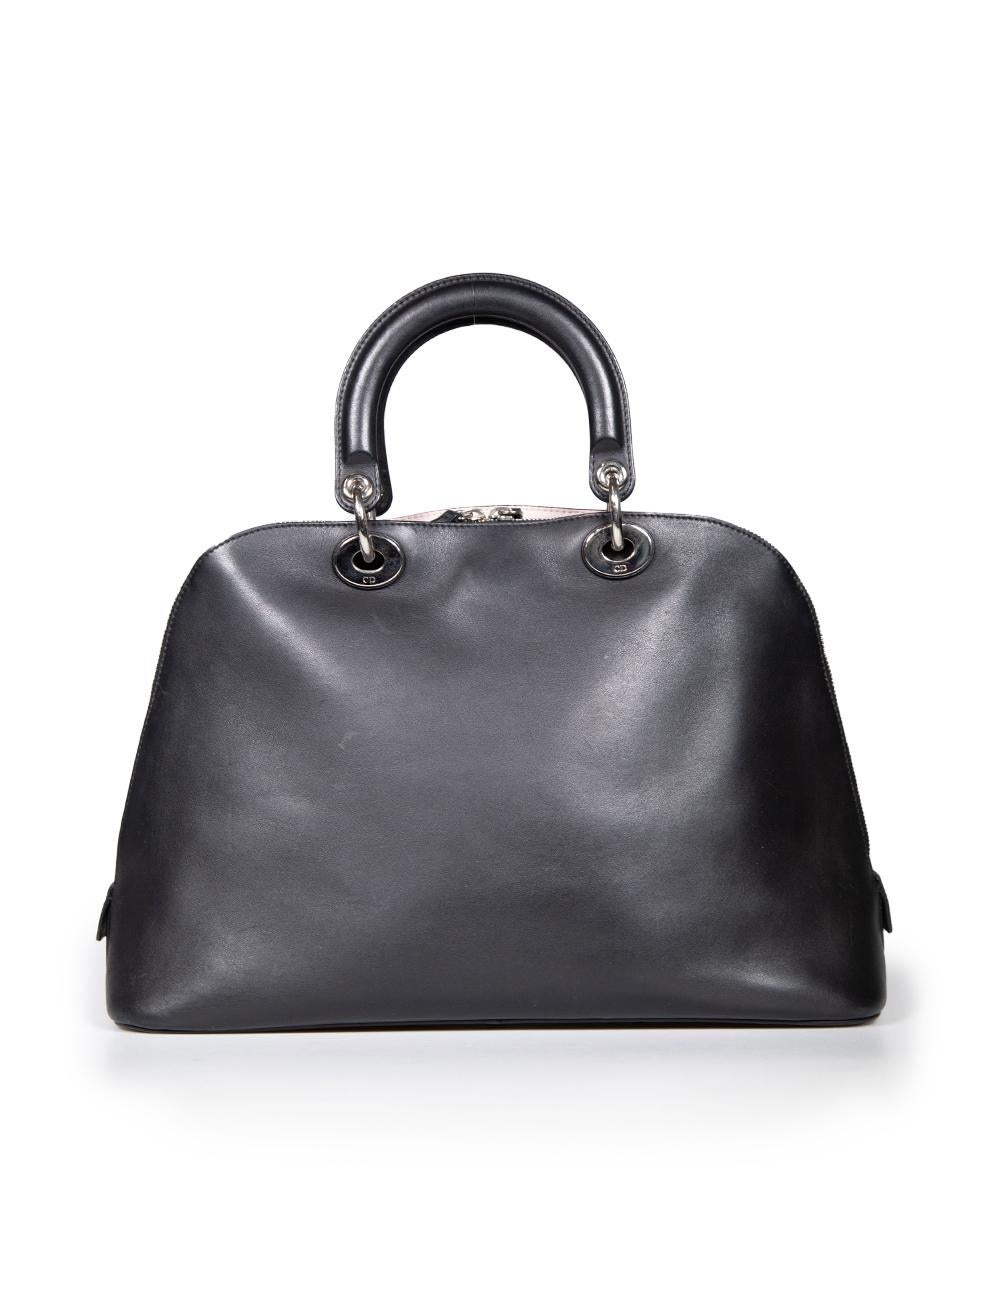 Dior 2012 Black Leather Diorissimo Top-Handle Bag In Good Condition For Sale In London, GB